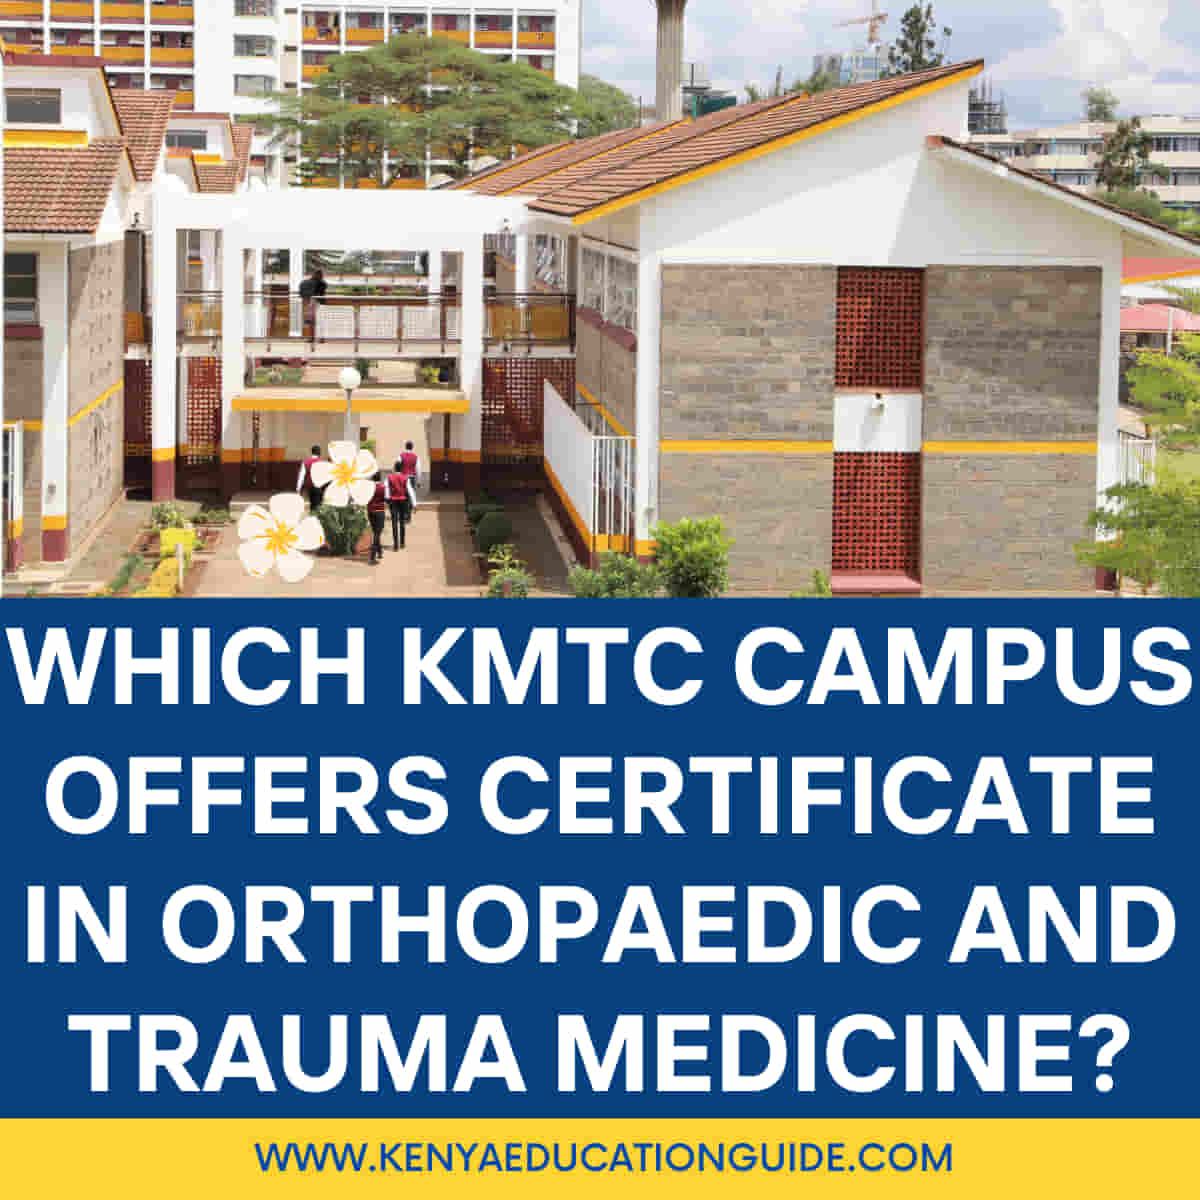 Which KMTC campus offers certificate in orthopaedic and trauma medicine?